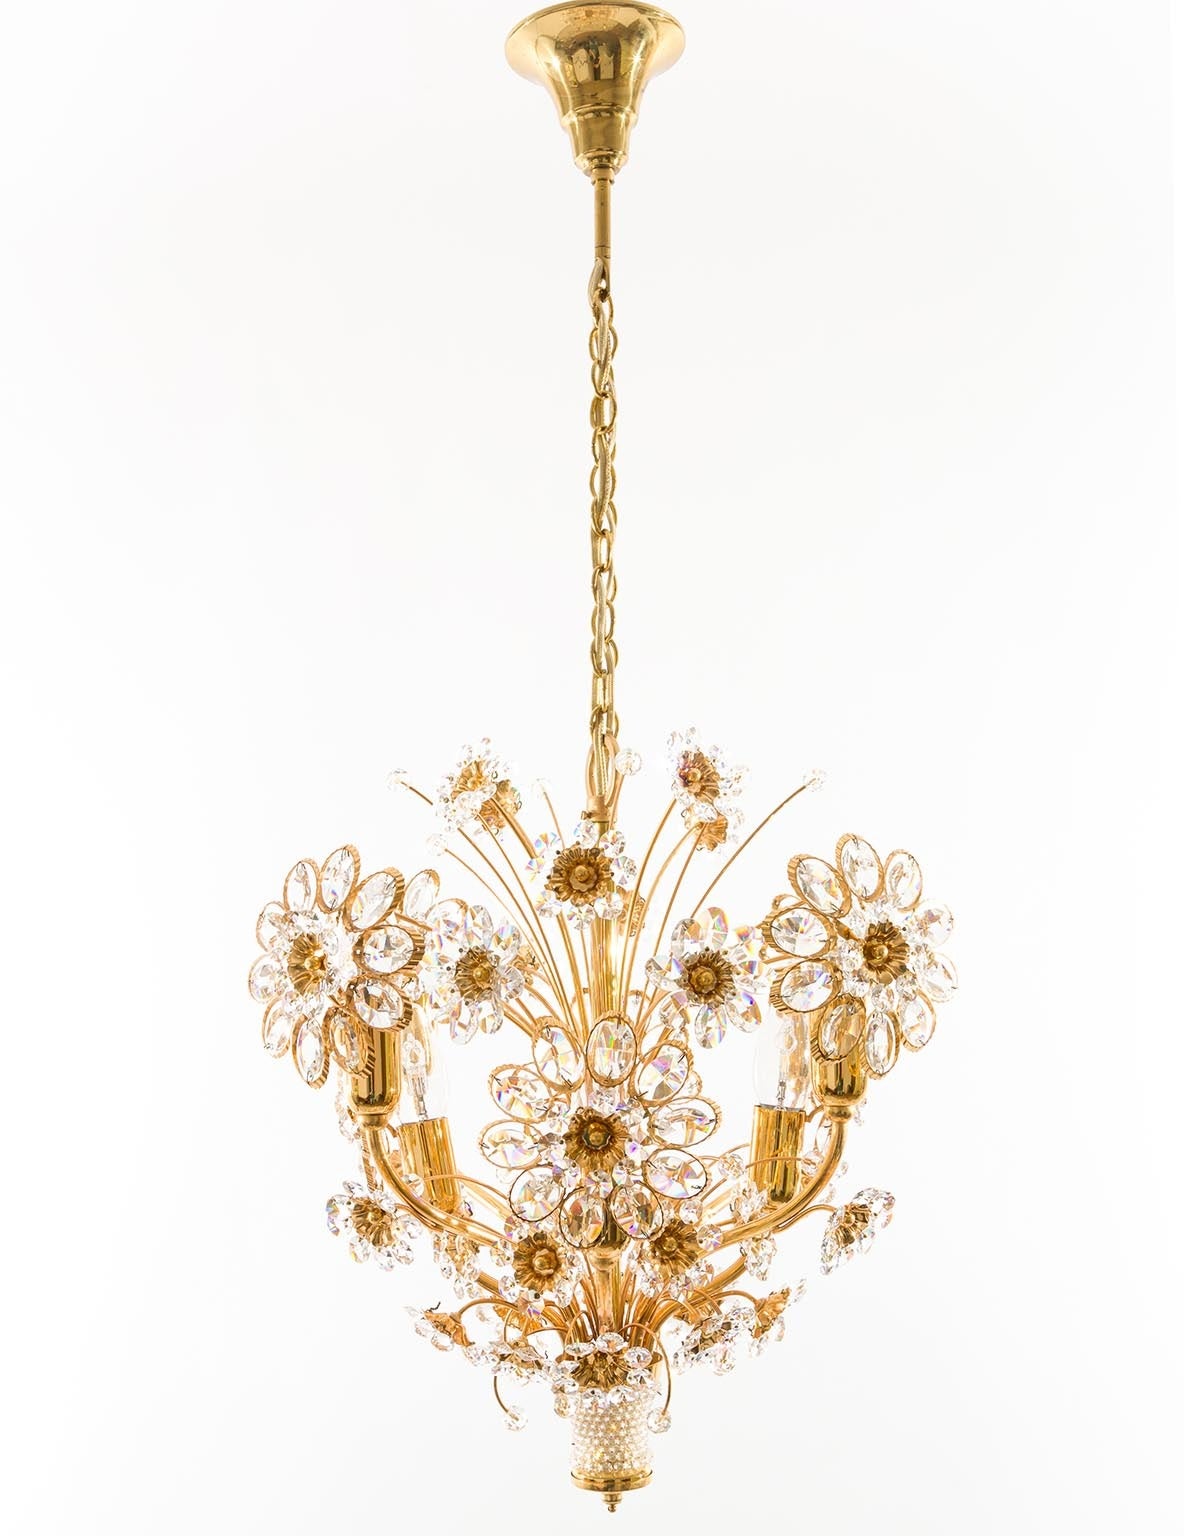 Mid-20th Century Palwa Pendant Light or Chandelier, Gilt Brass and Glass Crystal, Germany, 1960s